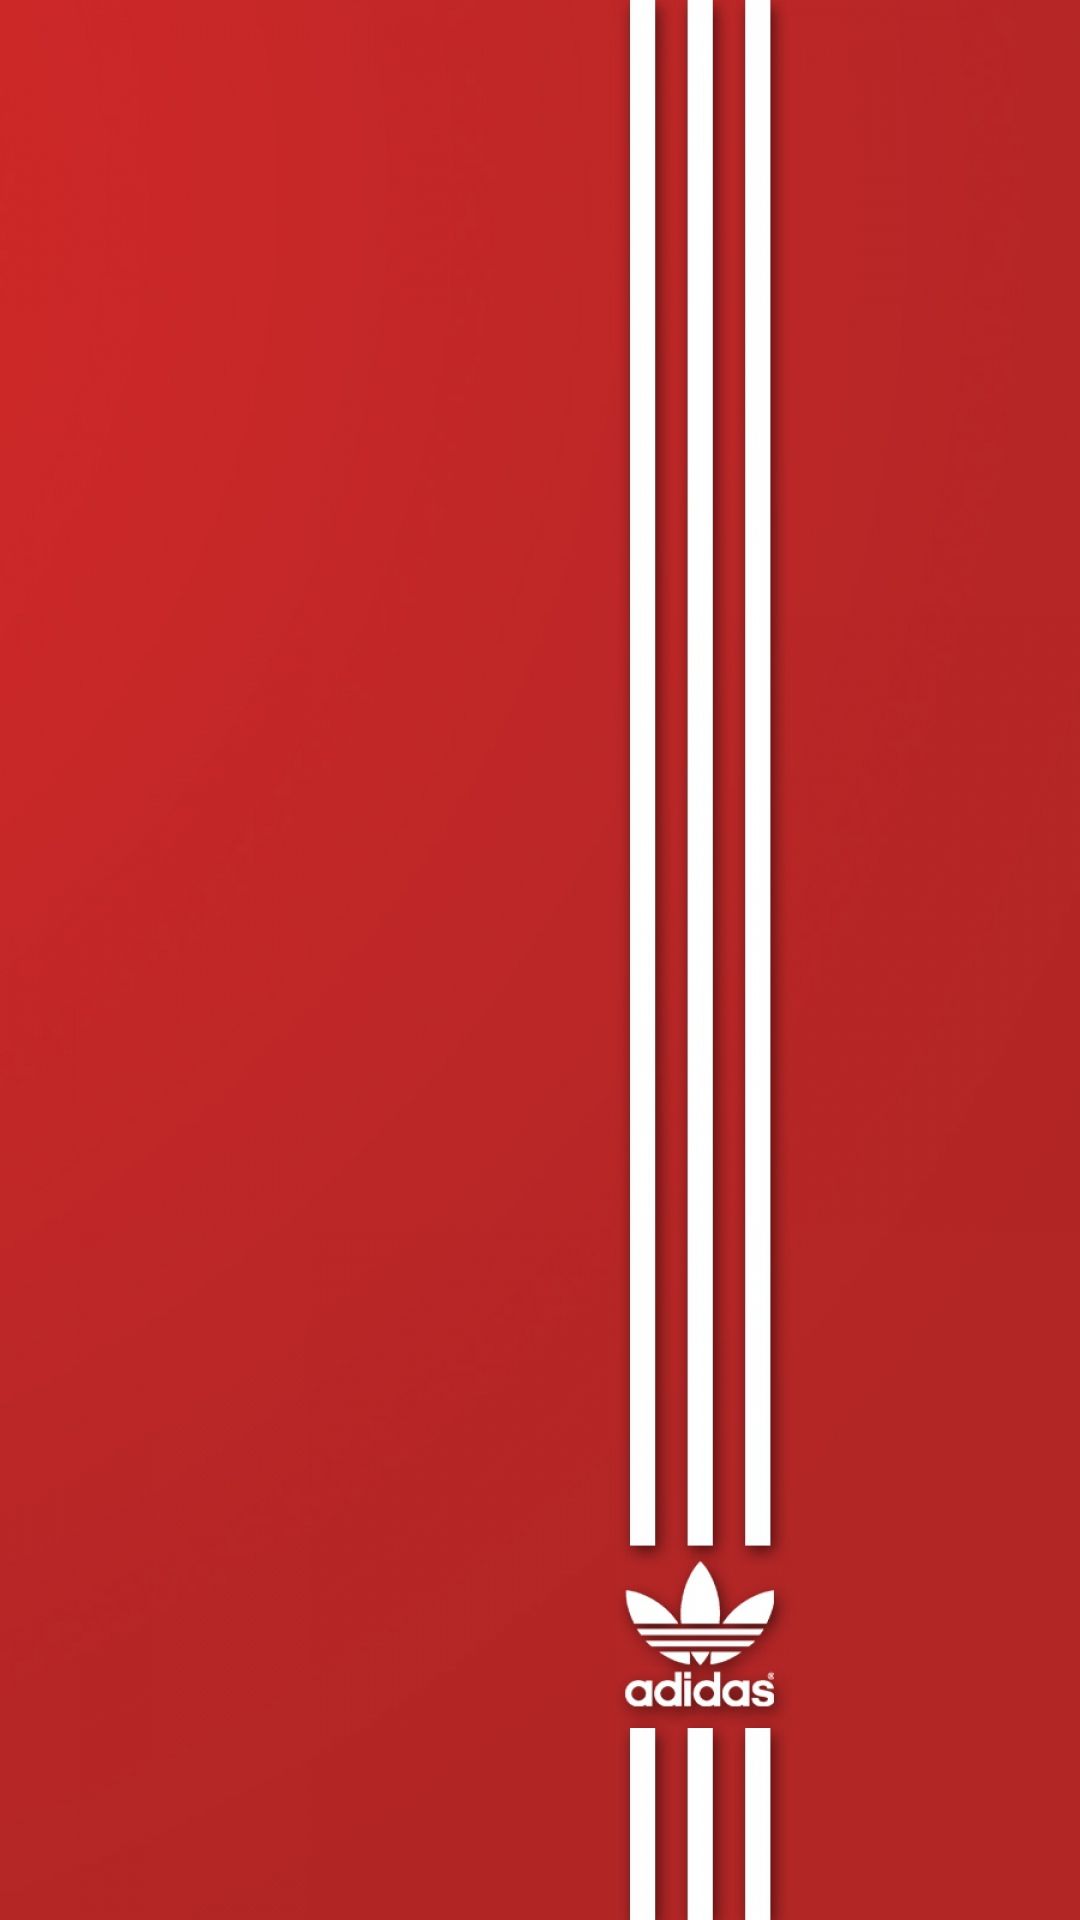 adidas hd wallpapers for mobile